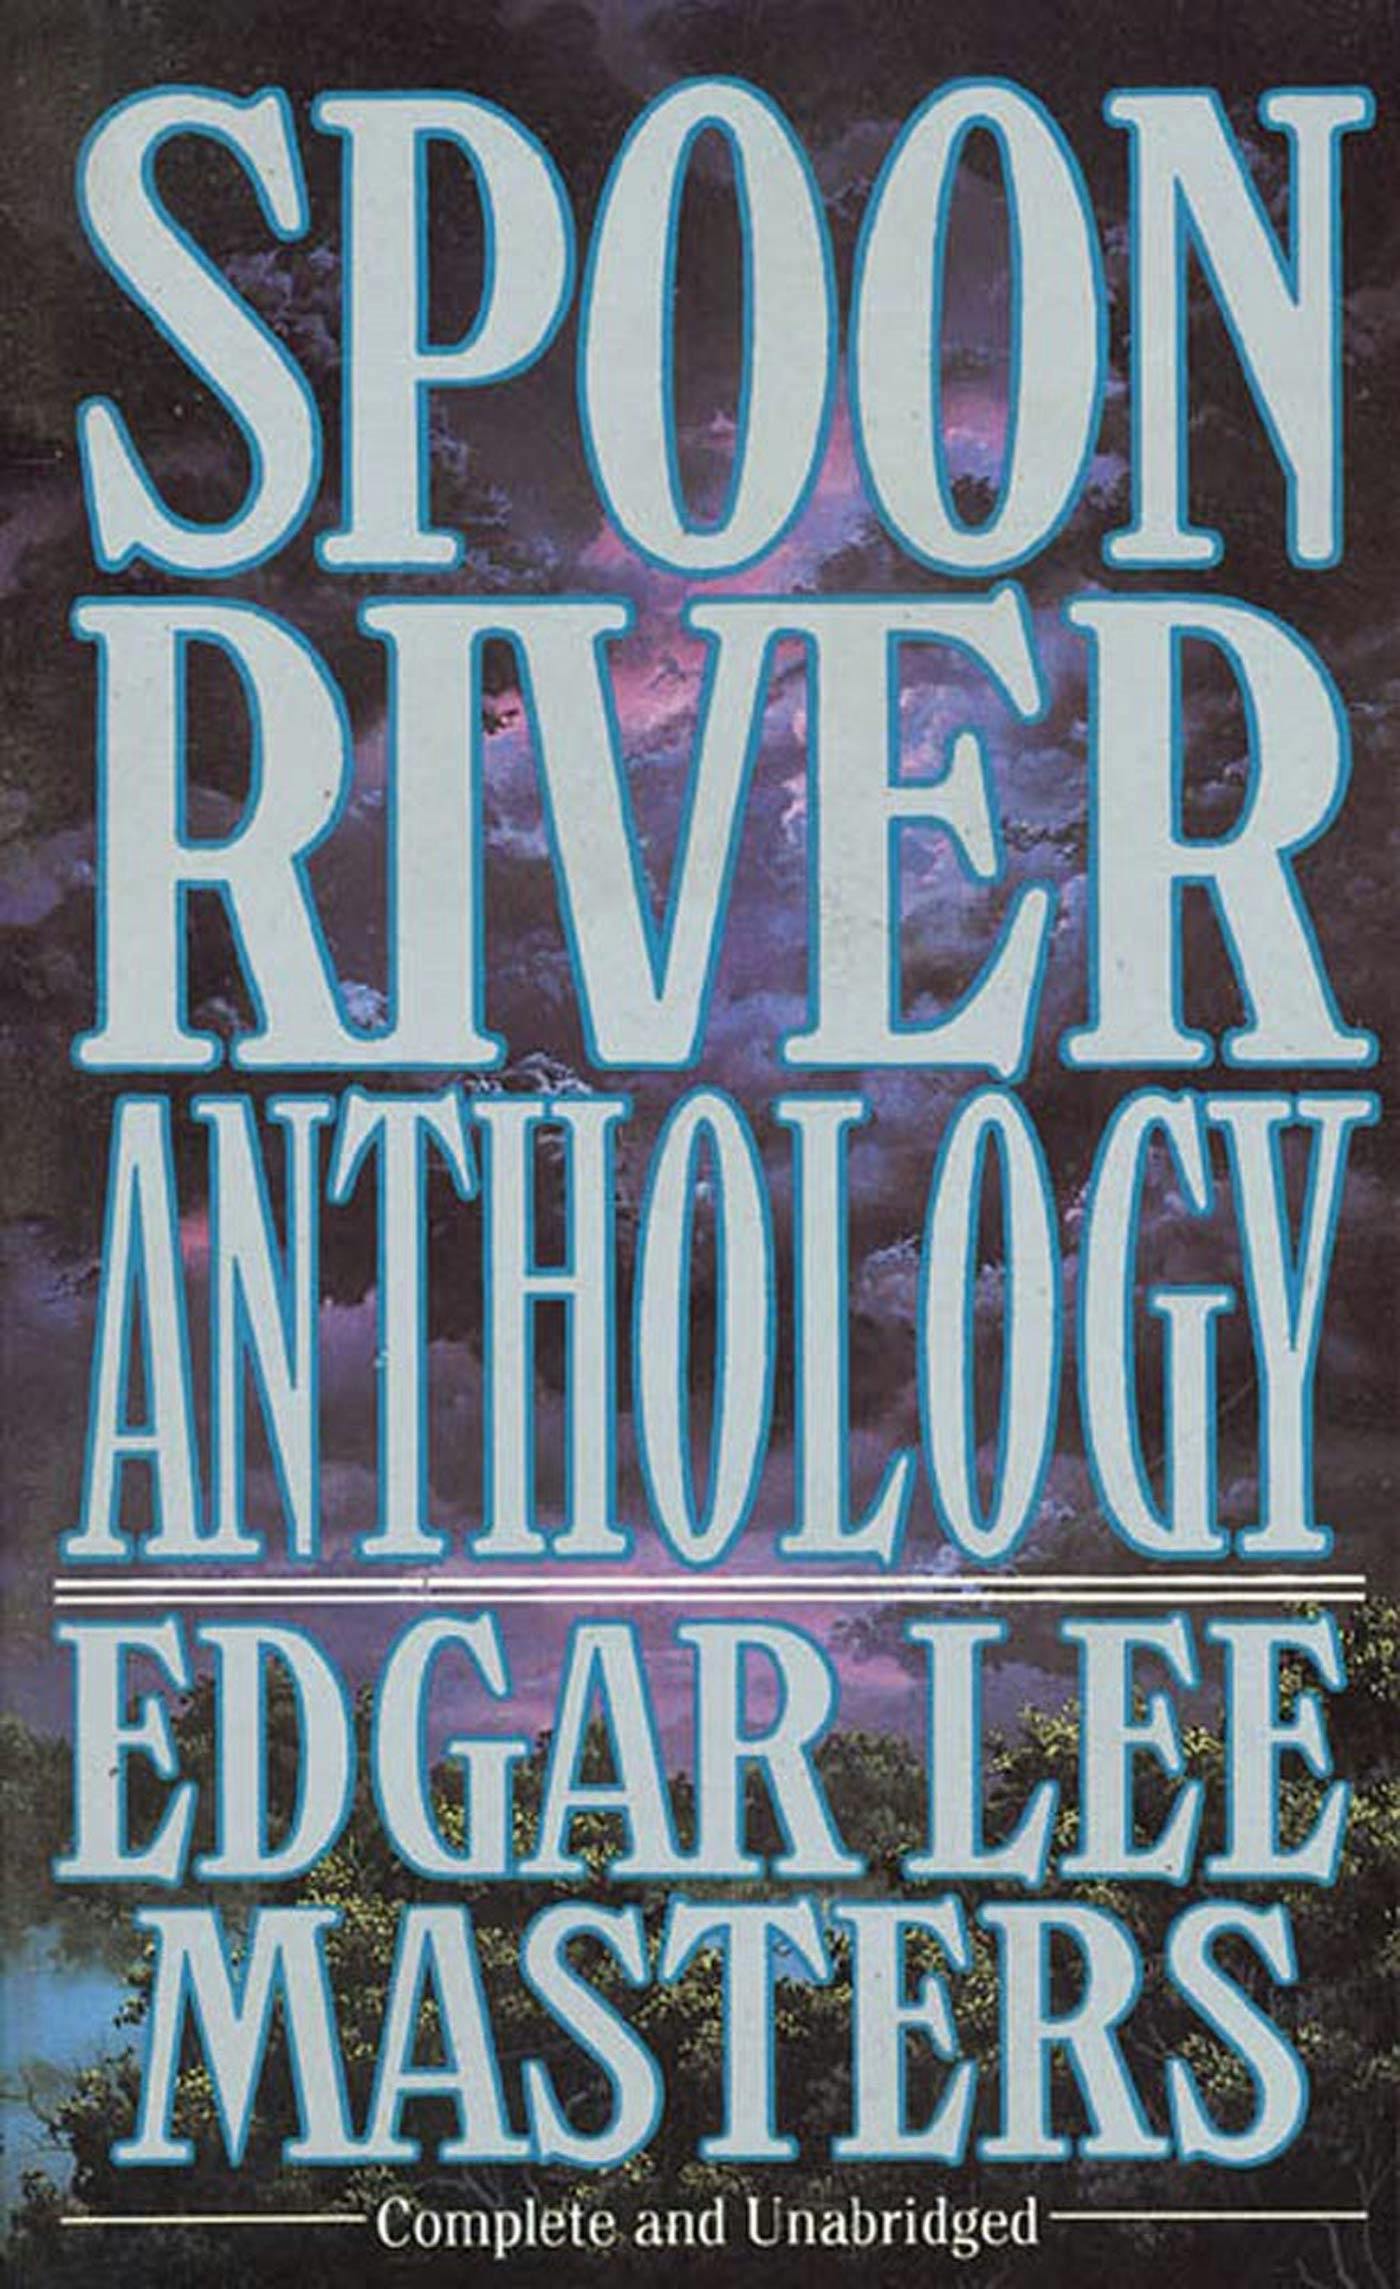 Image of Spoon River Anthology